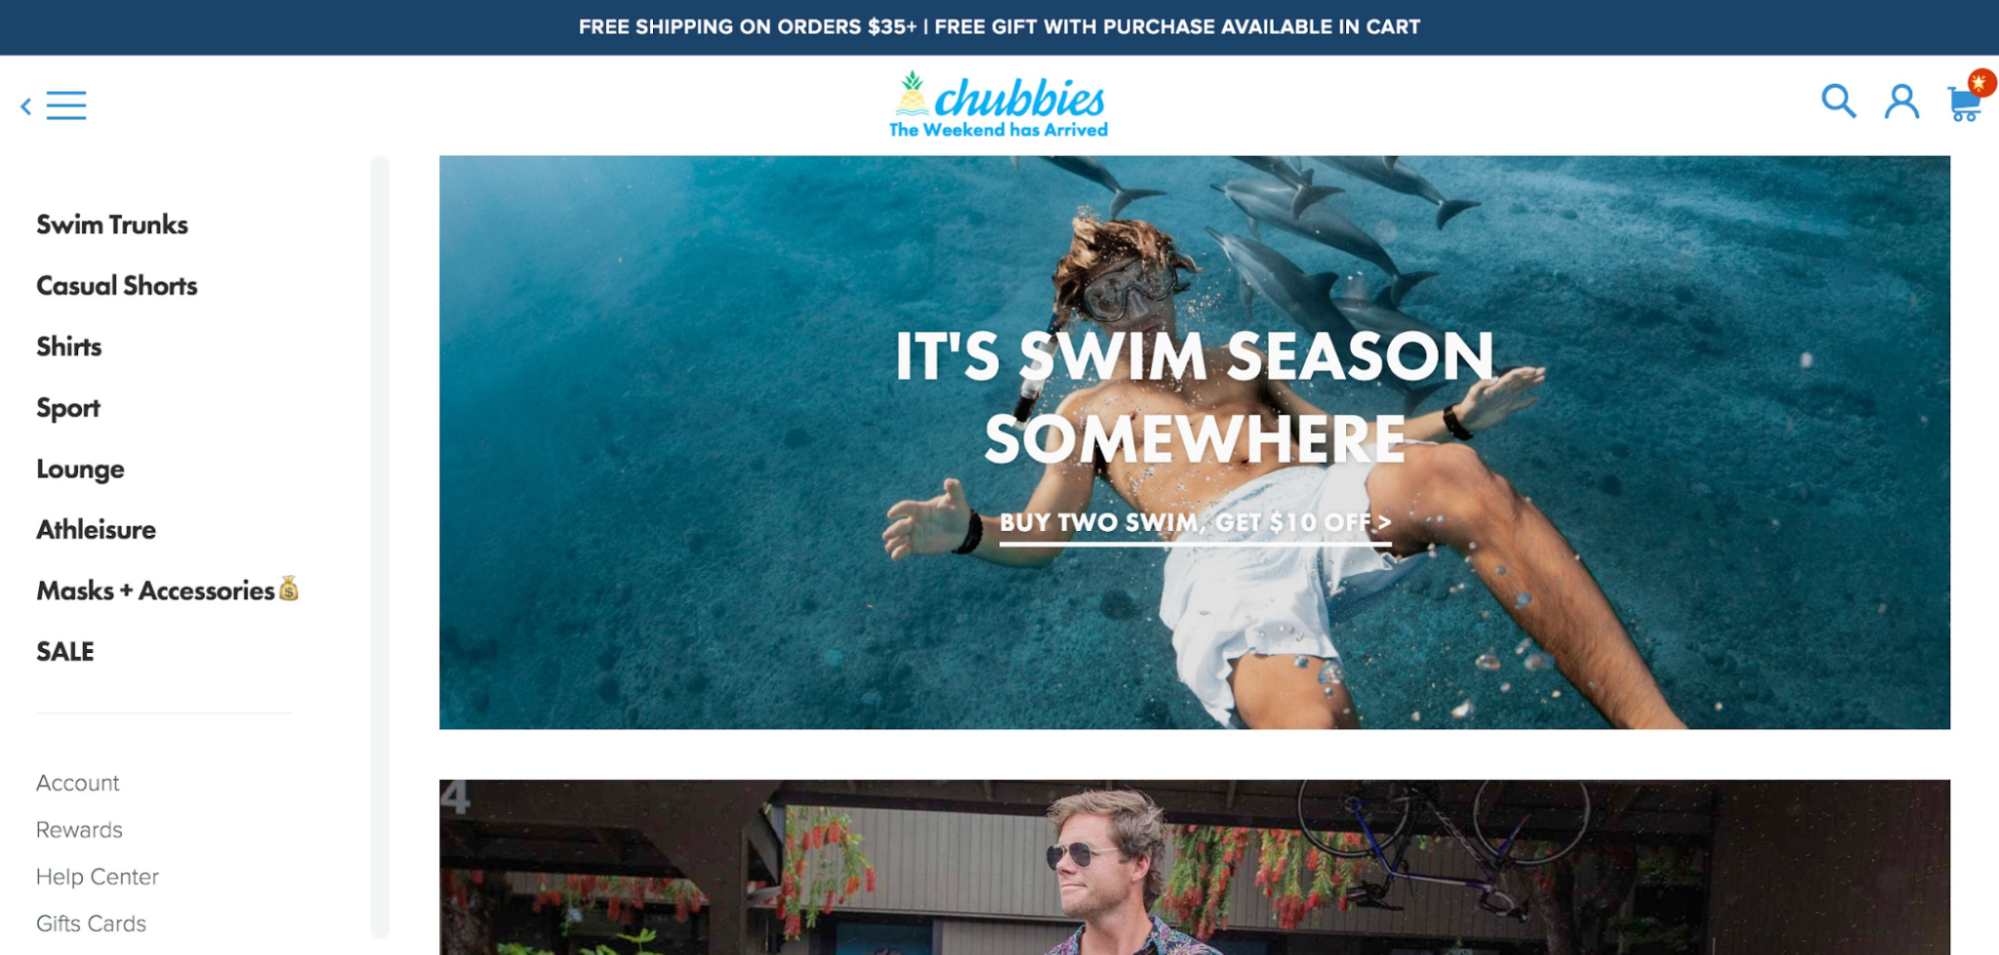 chubbies homepage example shows a great use of CTA copy in store design